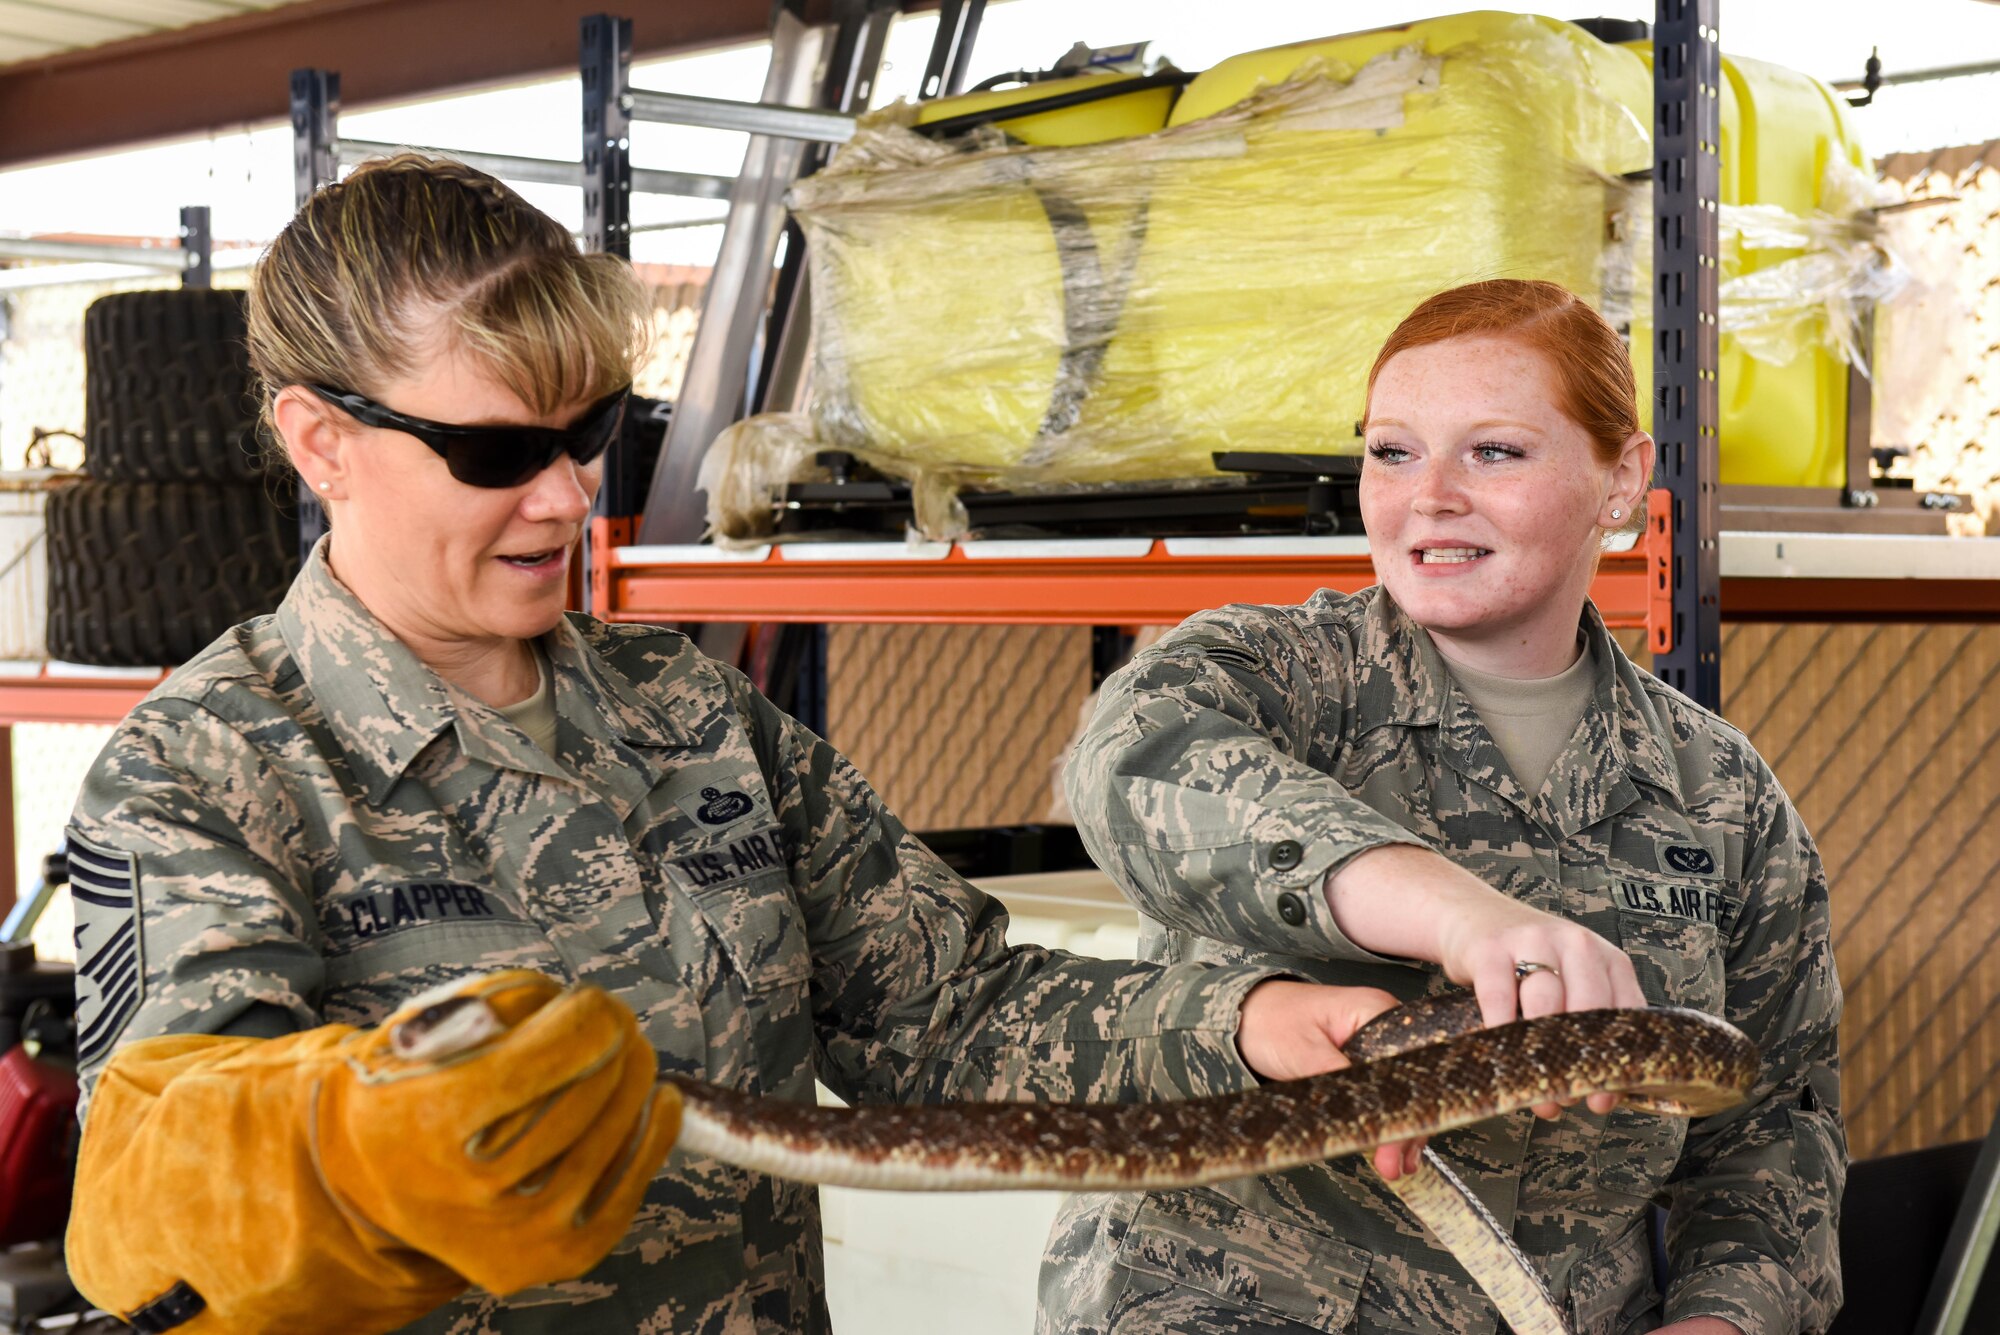 Chief Master Sgt. Theresa Clapper, 2nd Bomb Wing command chief, holds a rat snake found on Barksdale Air Force Base May 24, 2017. The 2nd Civil Engineer Squadron Pest Management office kept the rat snake and uses it for training initiatives such as getting new Airmen to recognize and familiarize themselves with venomous and non-venomous snakes. (U.S. Air Force photo/Airman 1st Class Sydney Bennett)